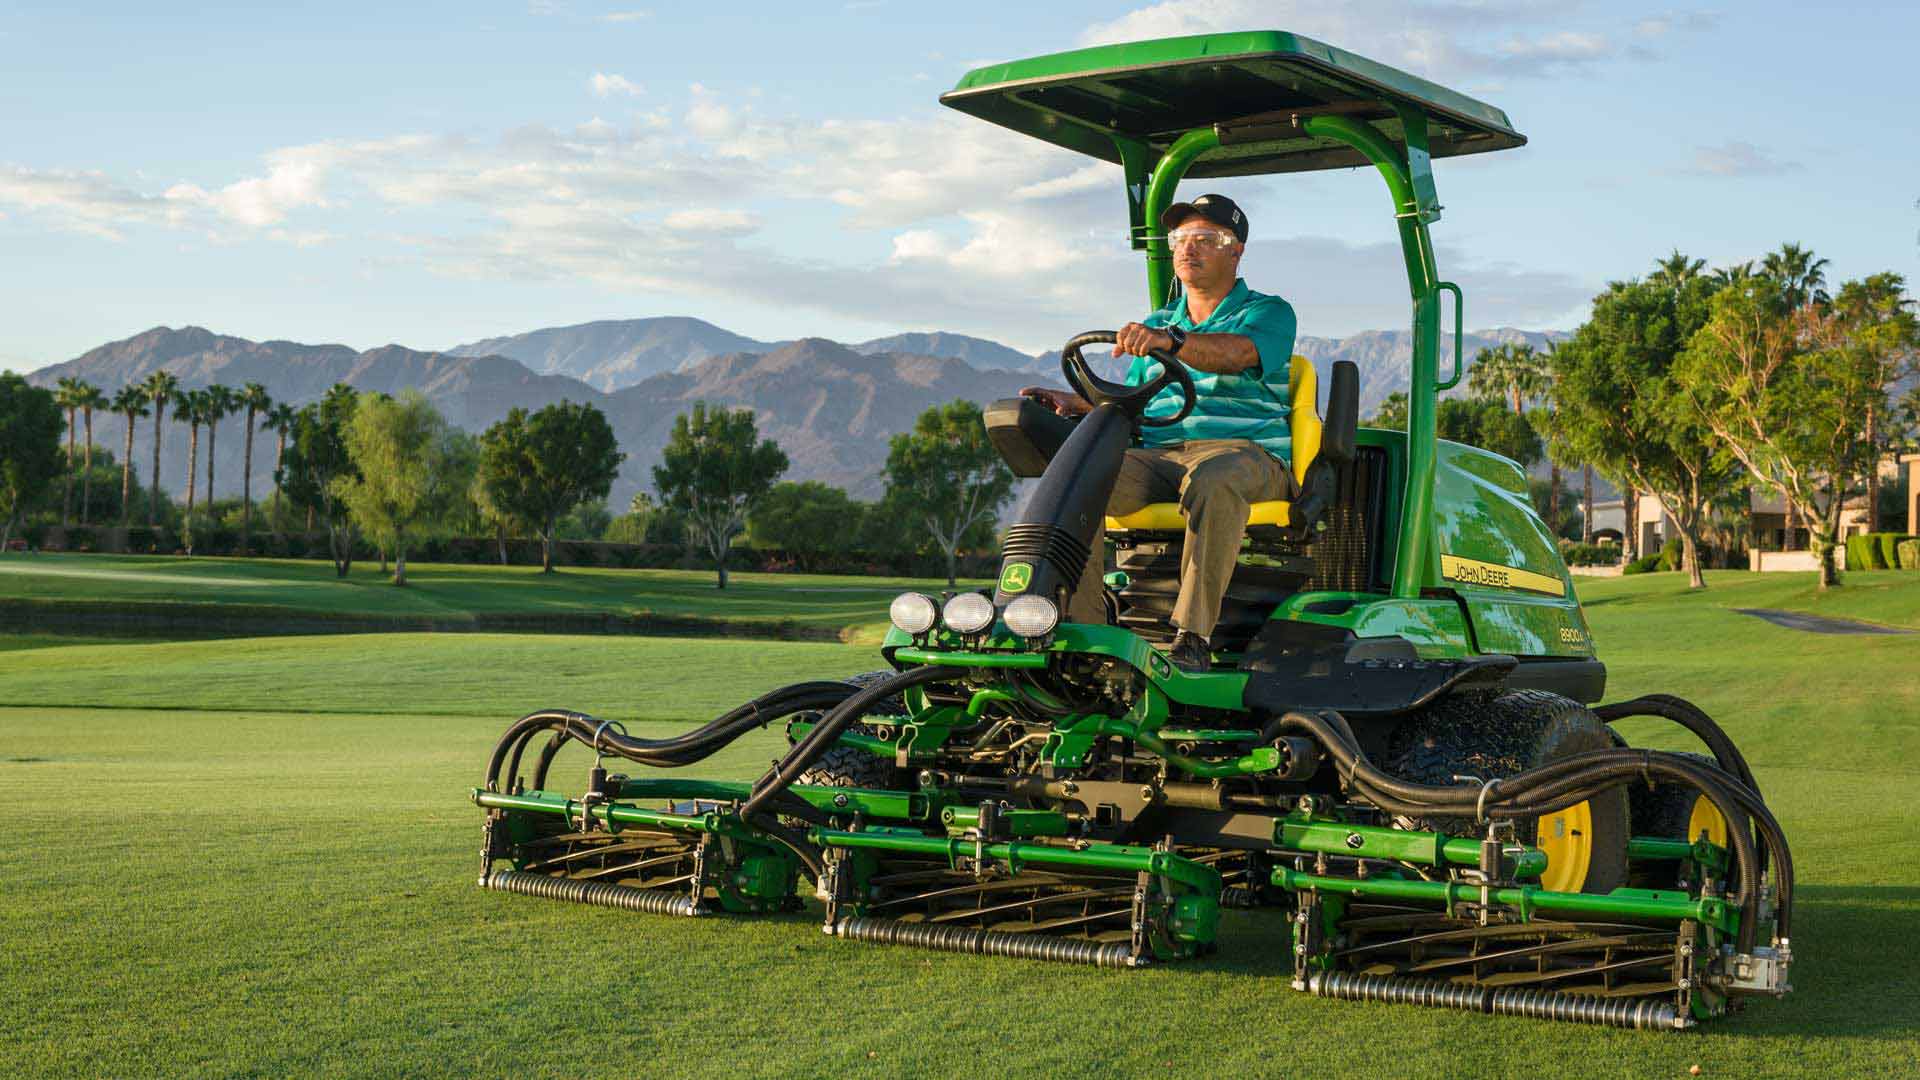 image of fairway mower on golf course